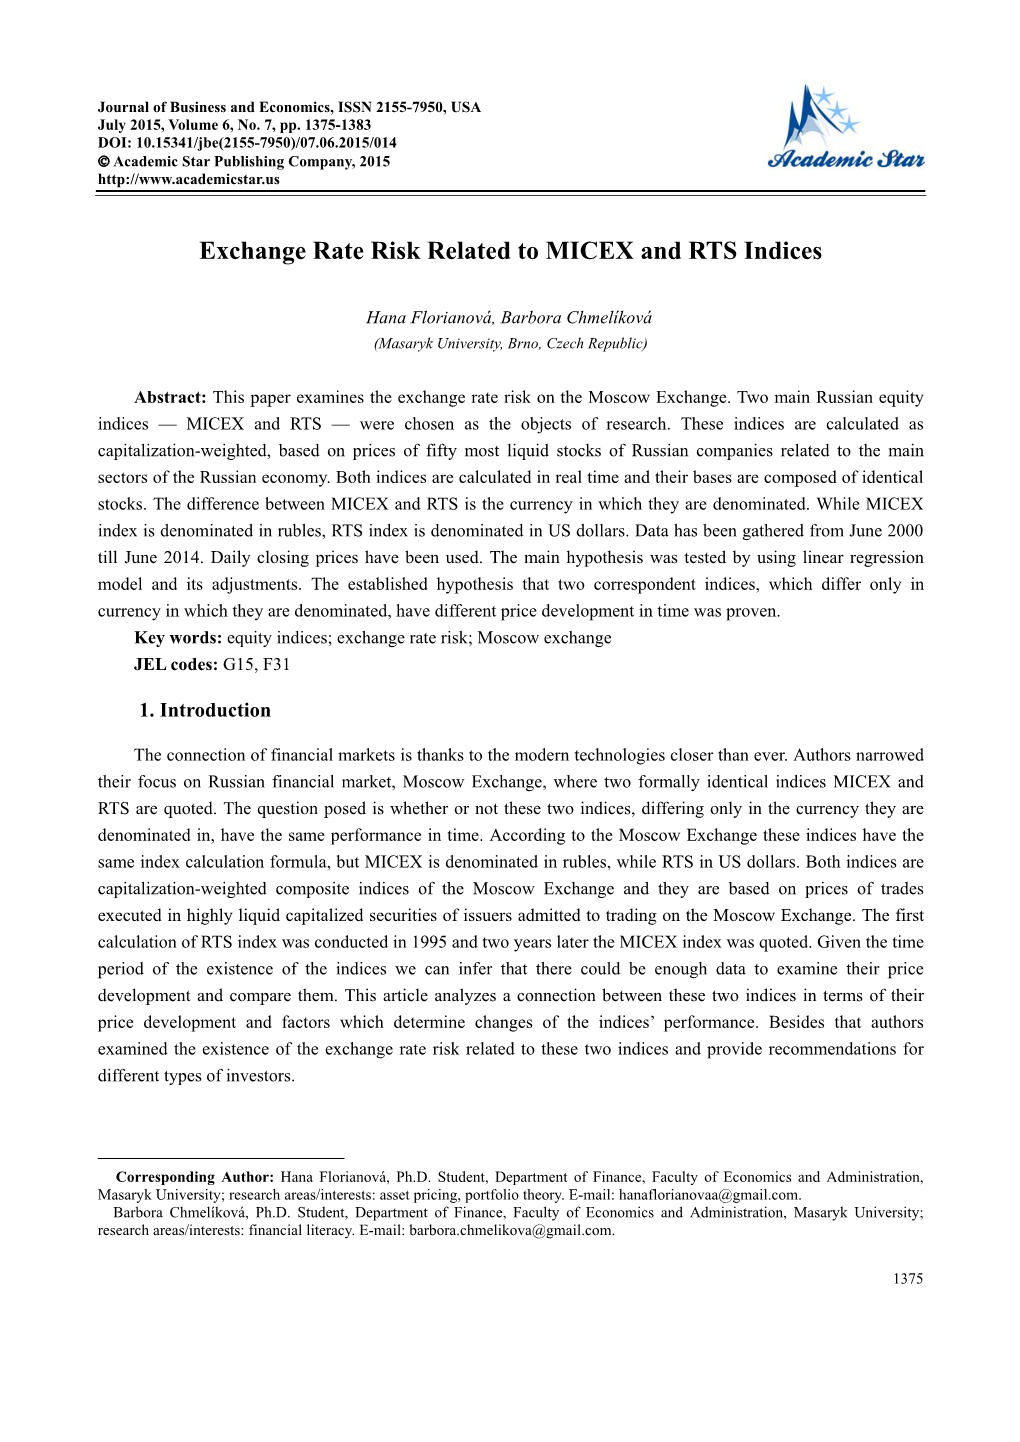 Exchange Rate Risk Related to MICEX and RTS Indices